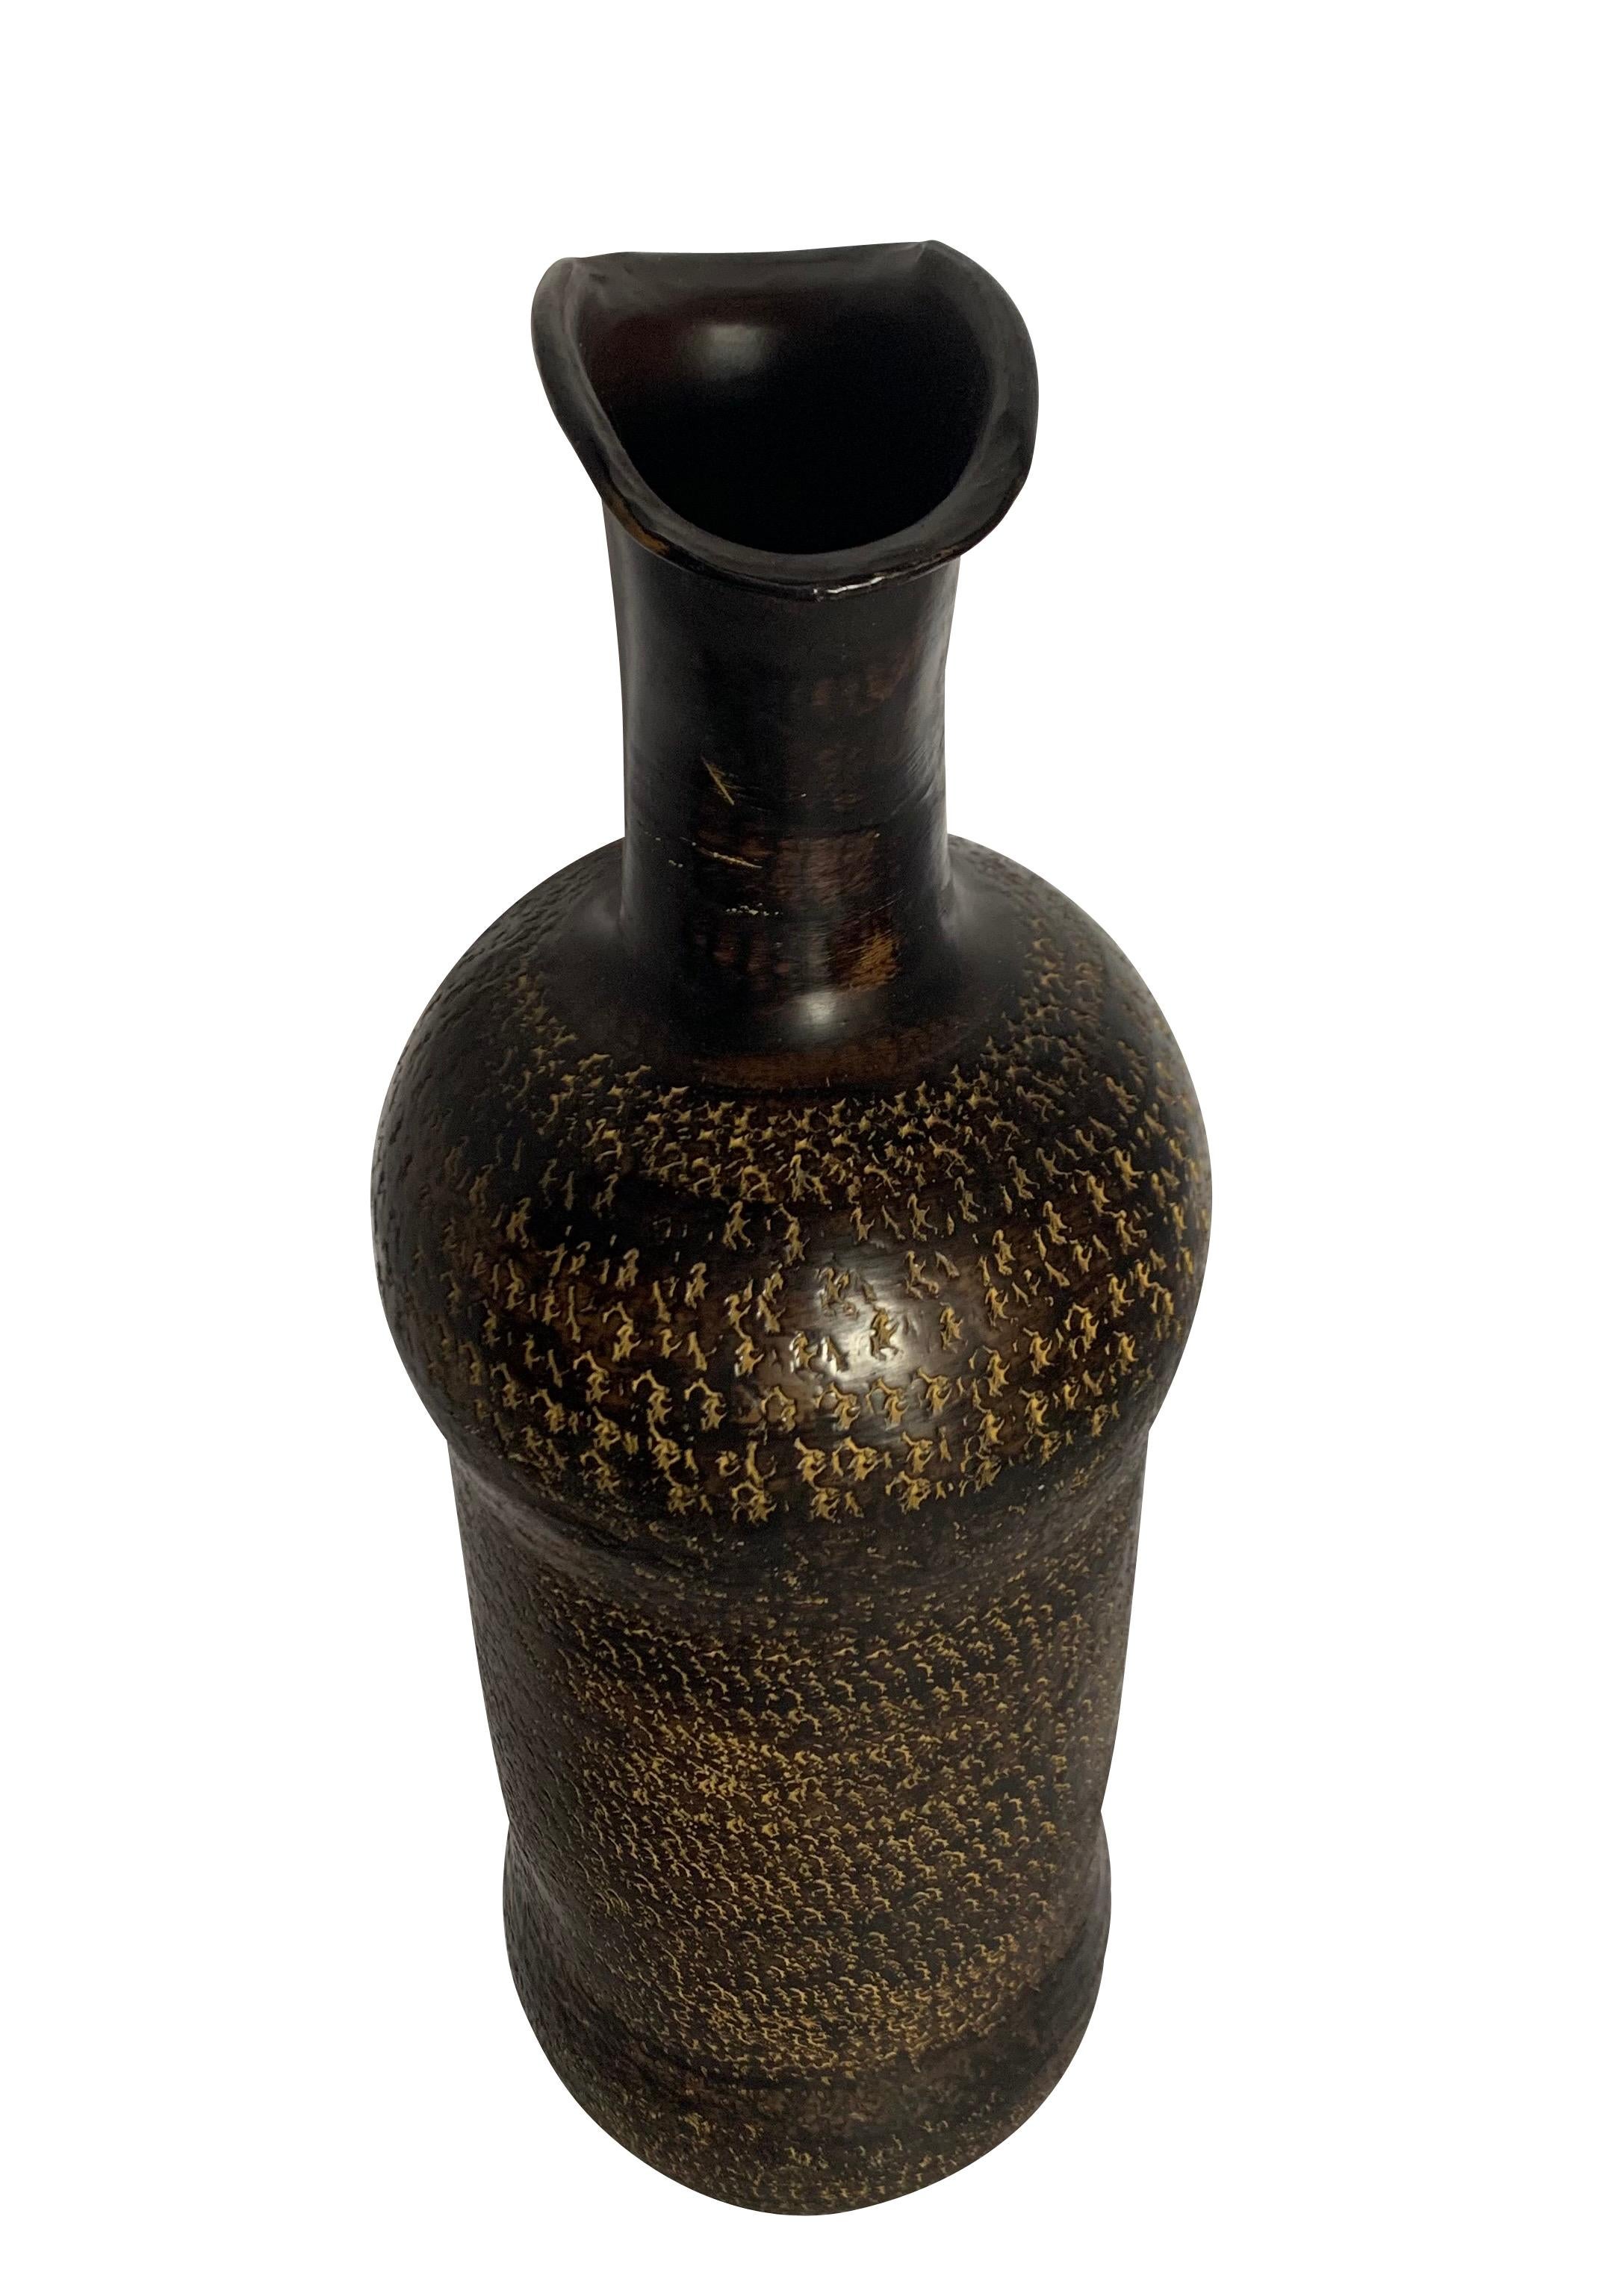 Contemporary Indian brown metal base vase with overall decorative pattern design
Decorative curved shaped spout
Also available and sits well with S5760 and S5759.